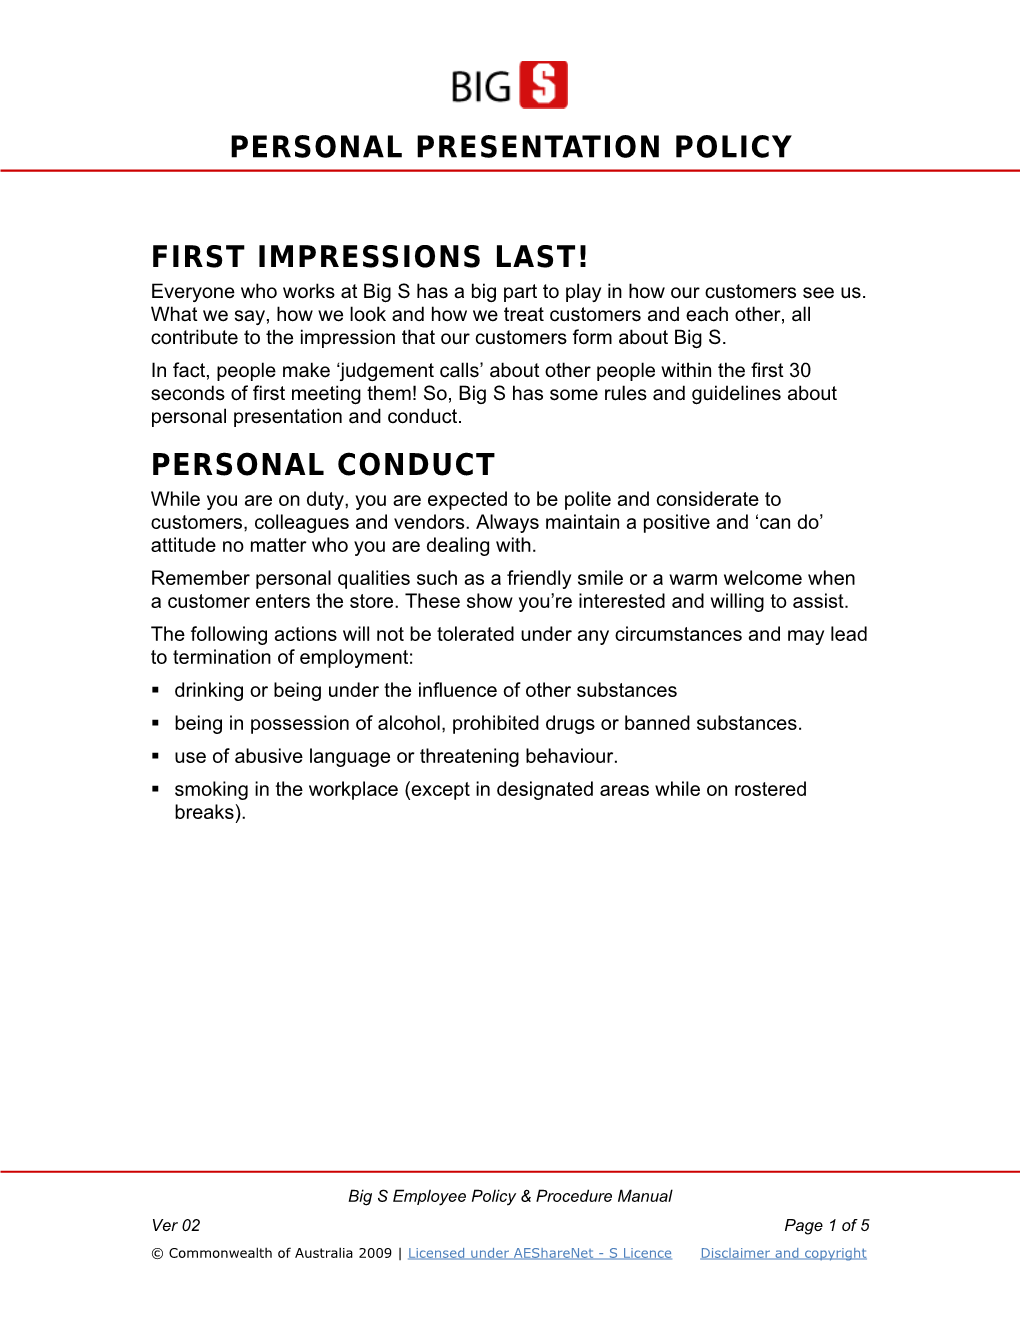 Personal Presentation Policy s1